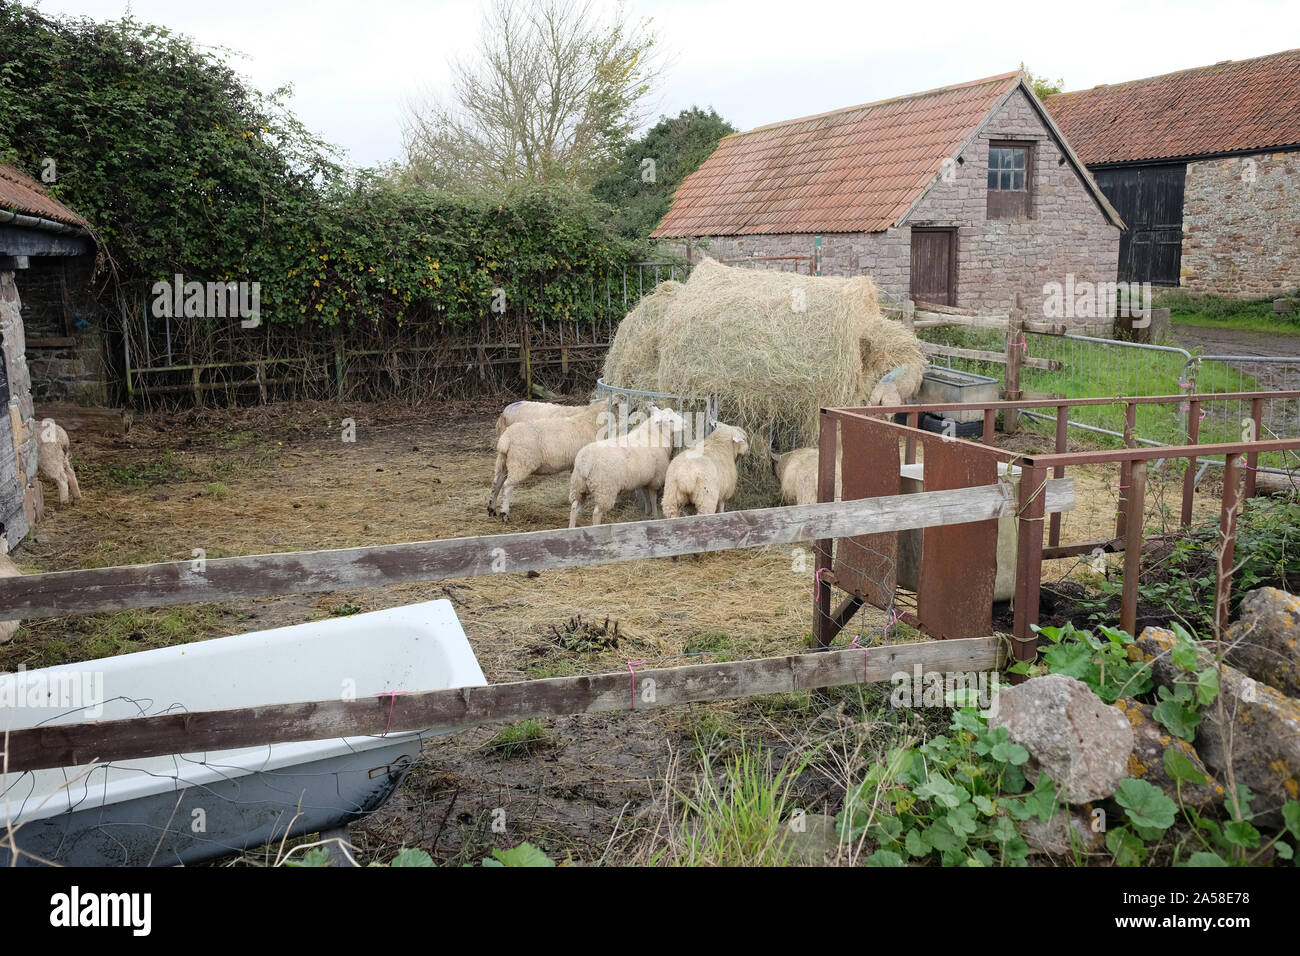 October 2019 - farm yard sheep eating from a feeder Stock Photo